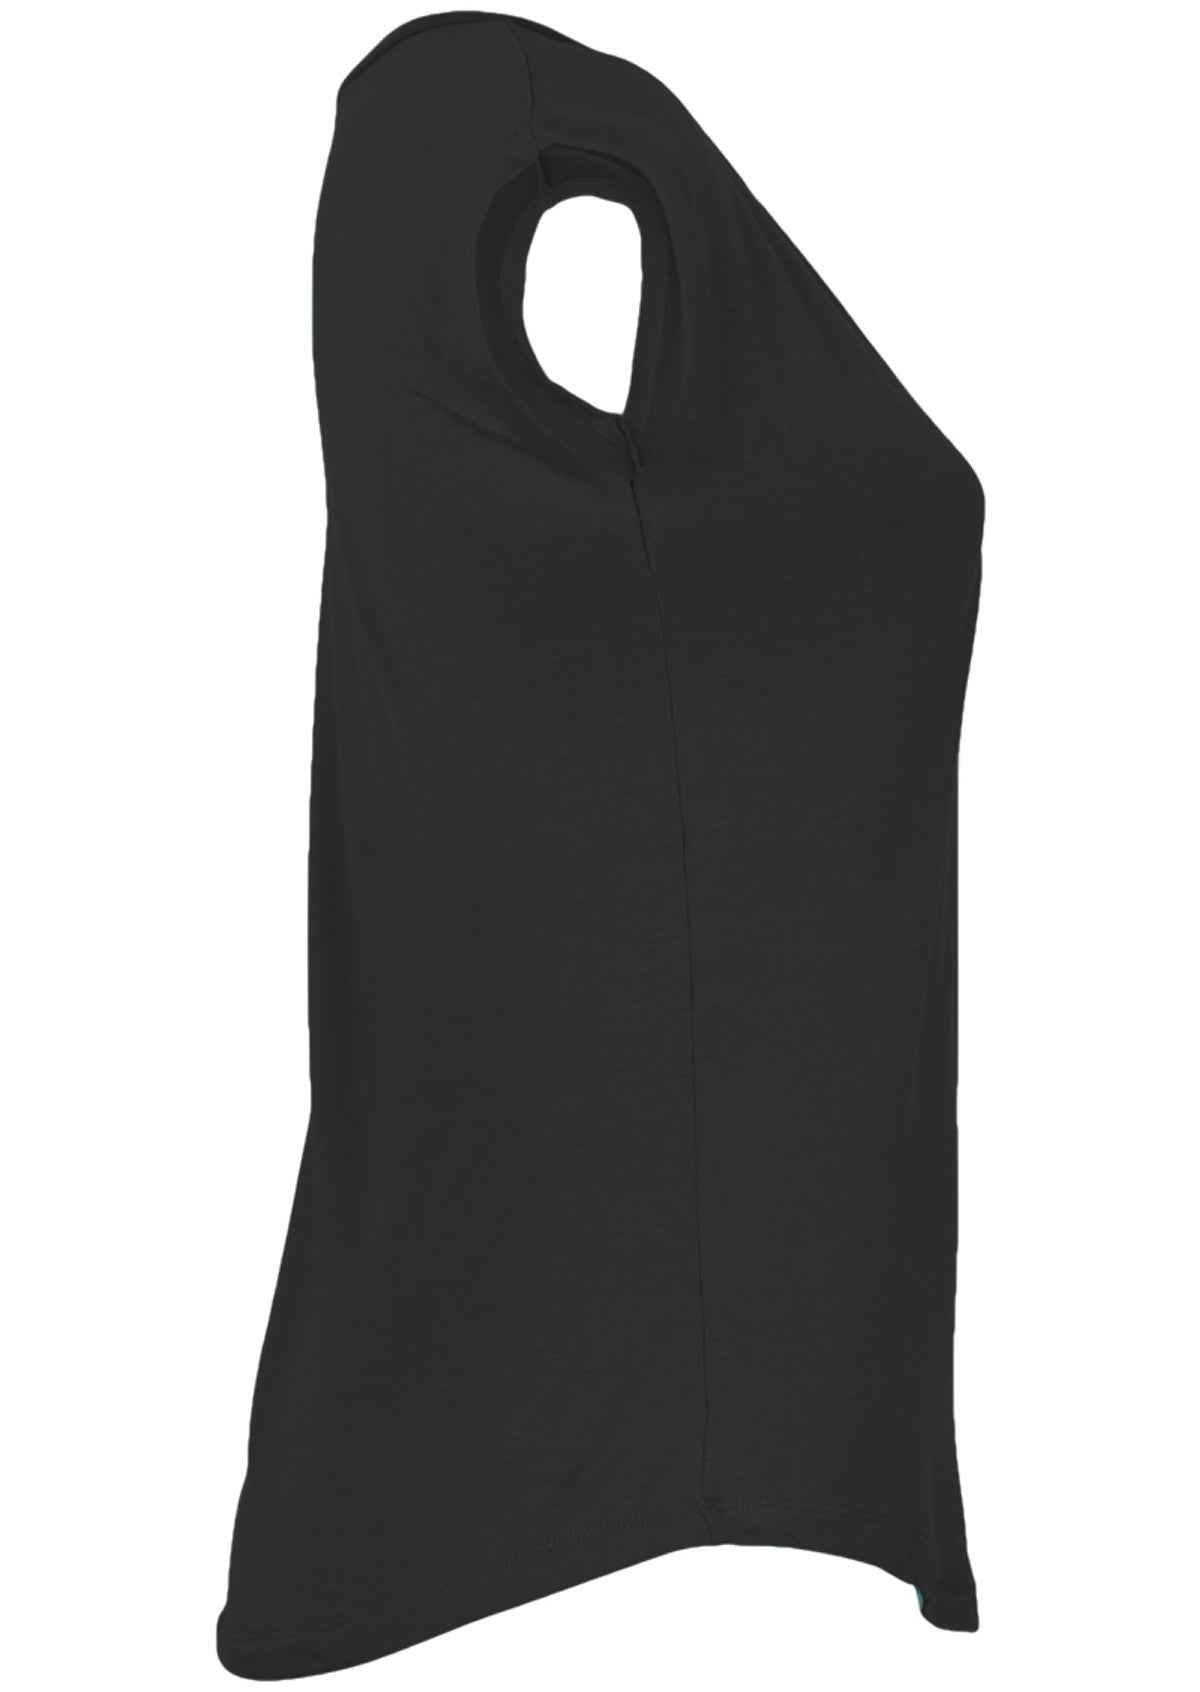 Side view of women's black v-neck short cap sleeve rayon top